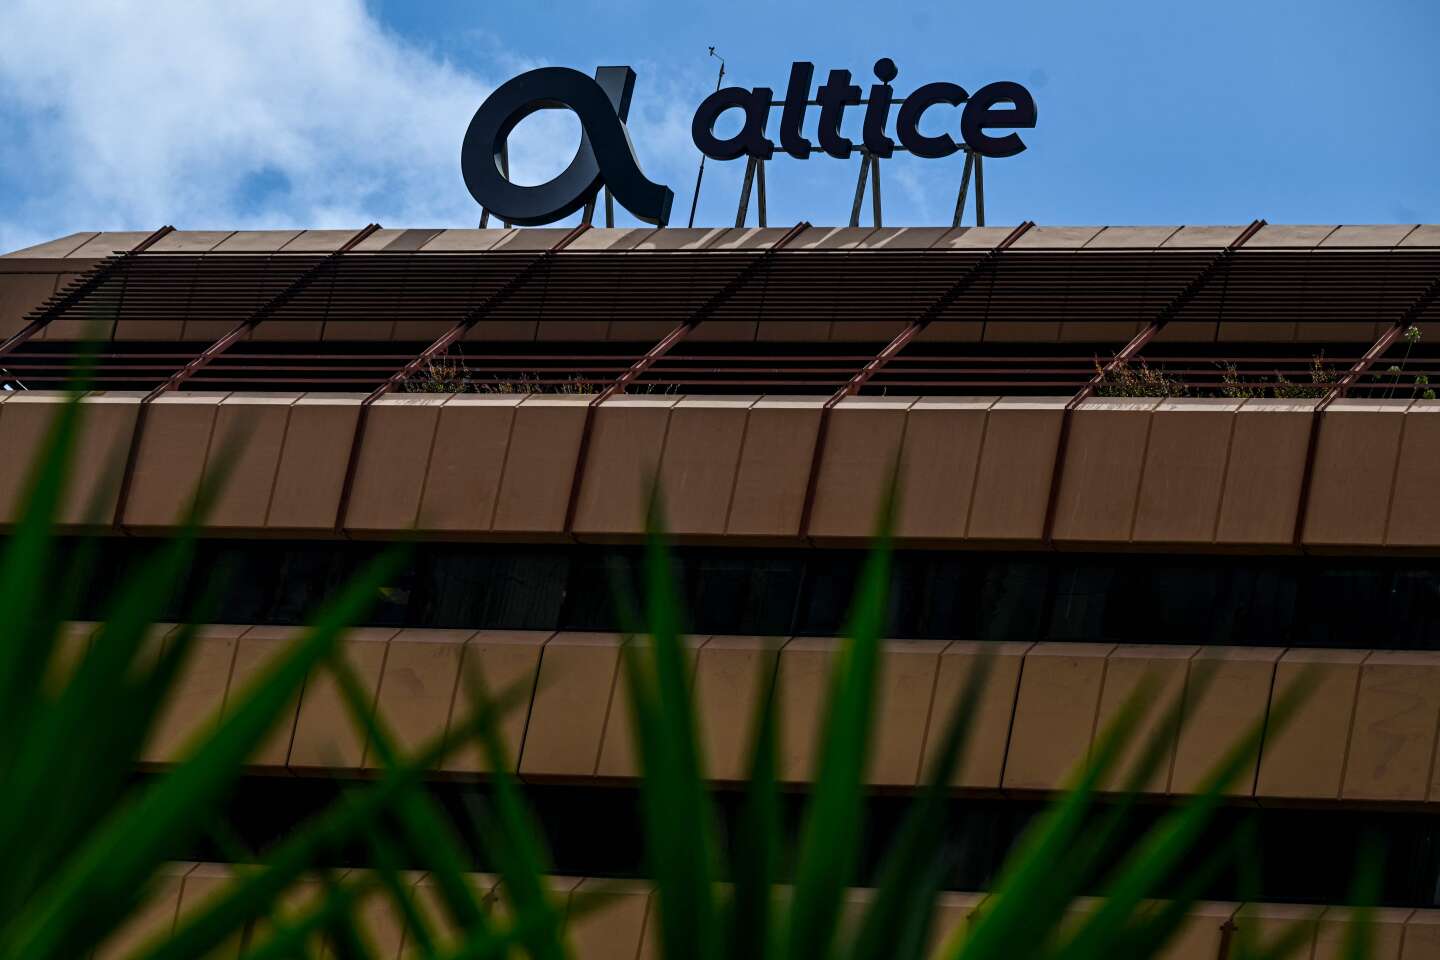 Armando Pereira, co-founder of Altice, is under house arrest after being accused of corruption and money laundering in Portugal.